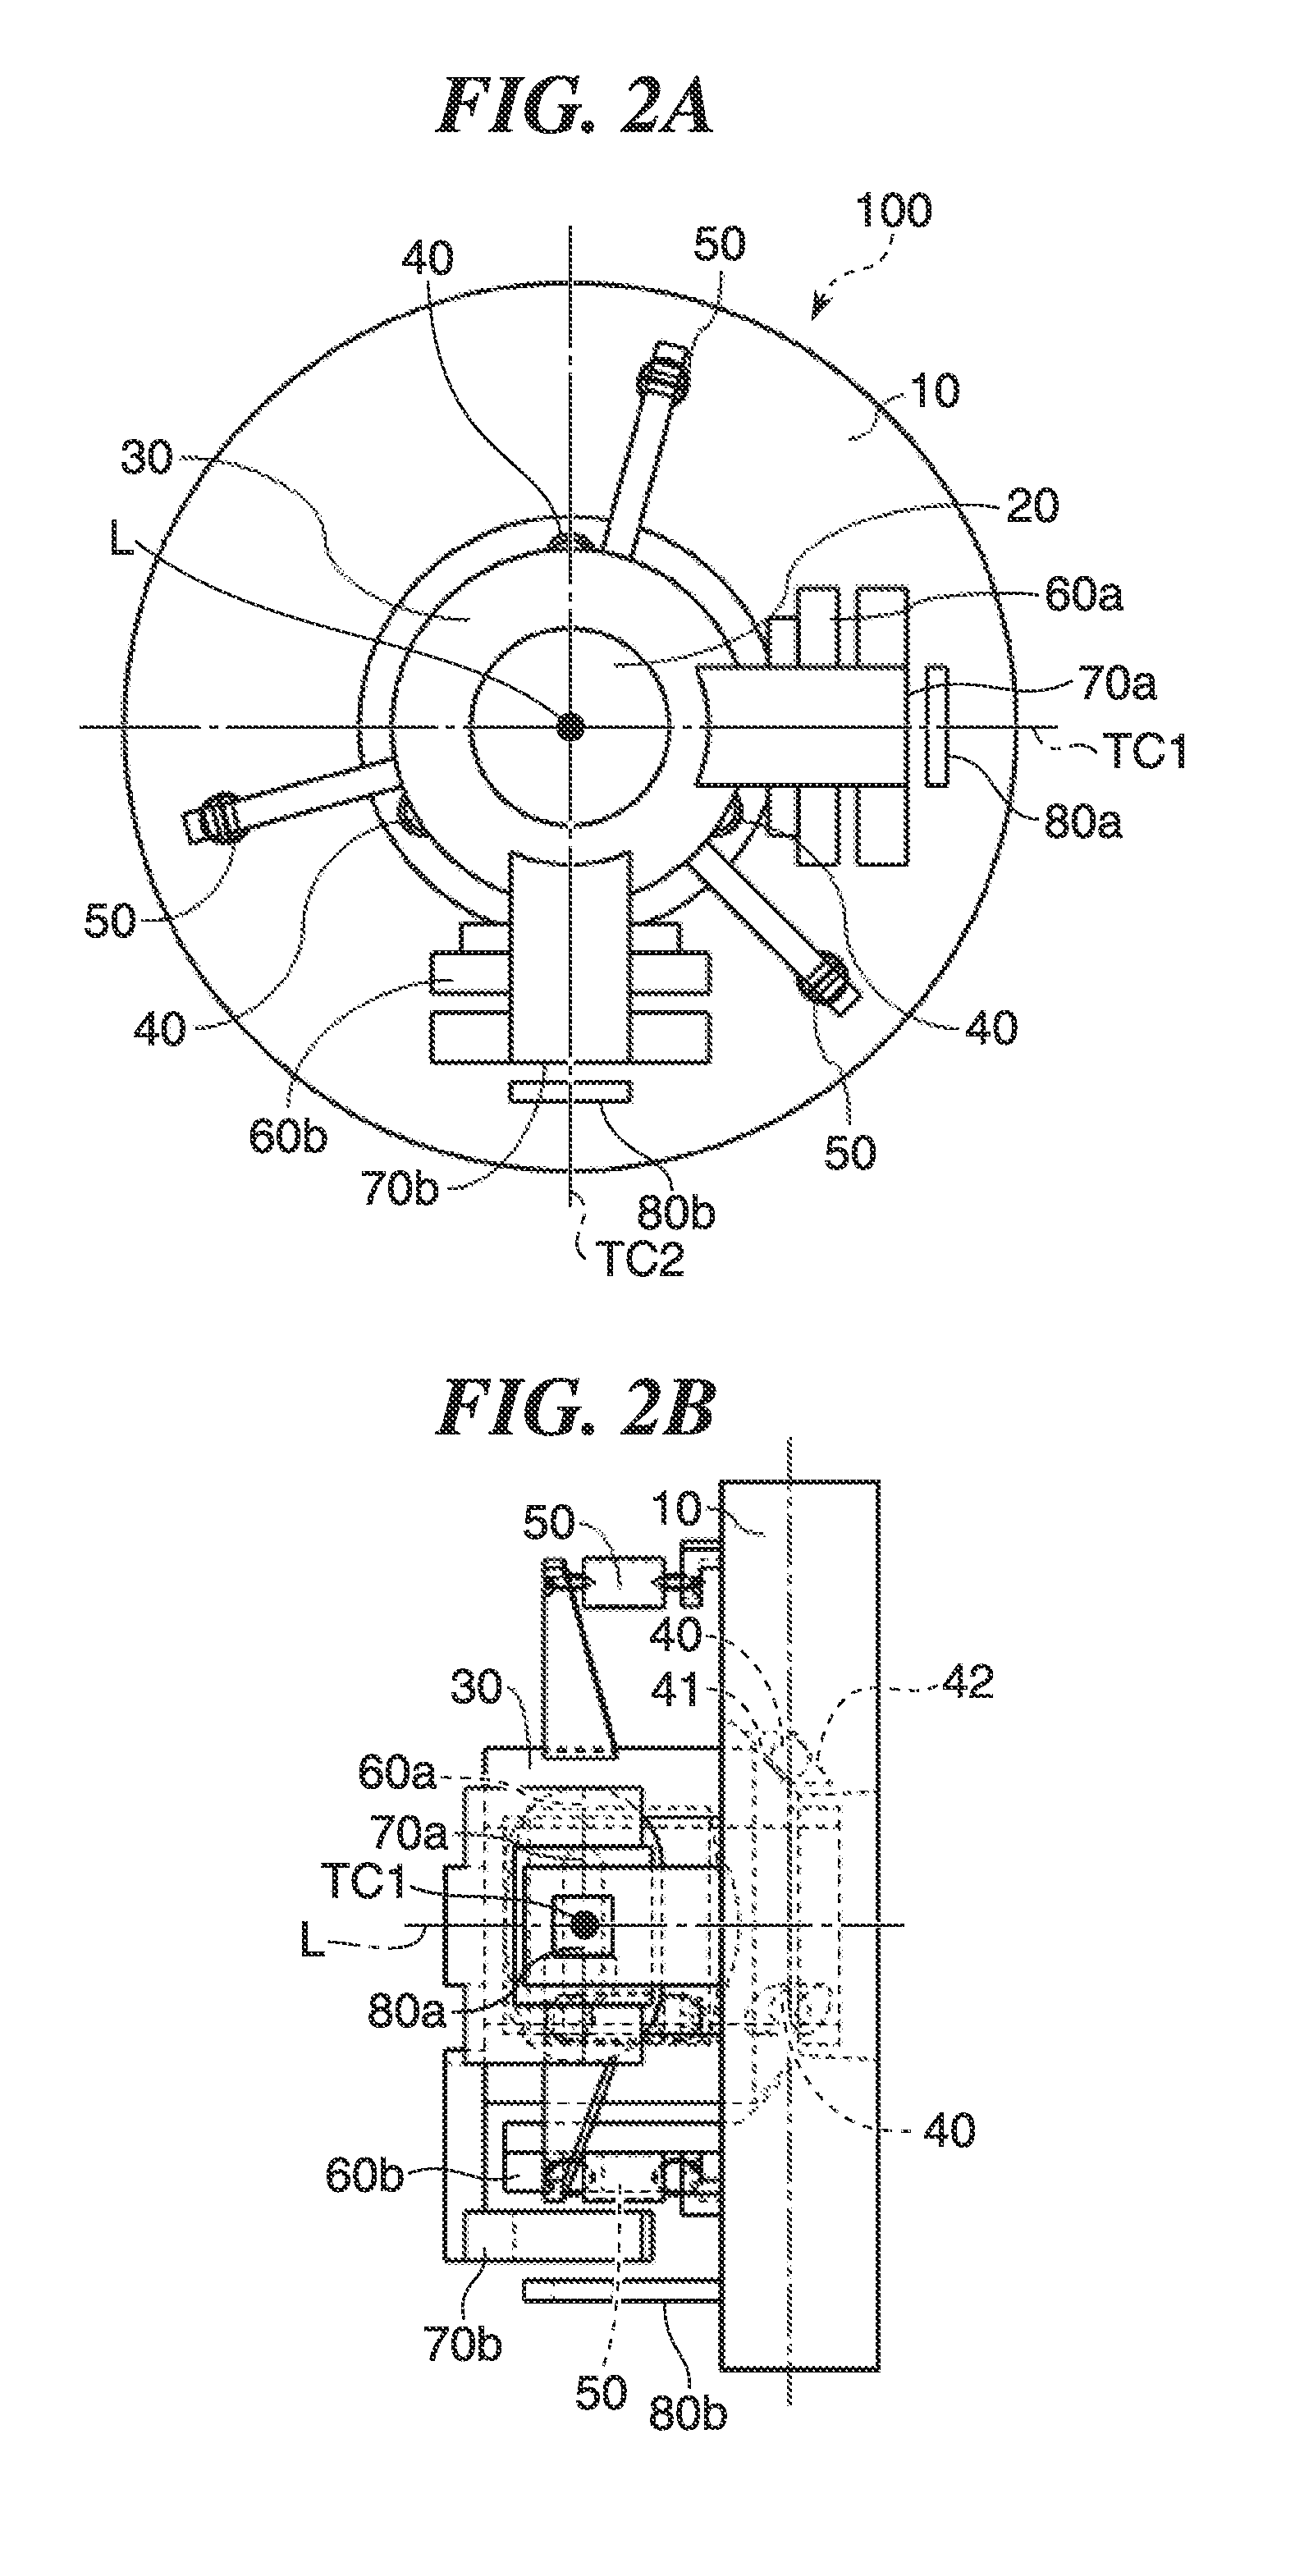 Image stabilization apparatus that reduces blurring of subject image and optical device